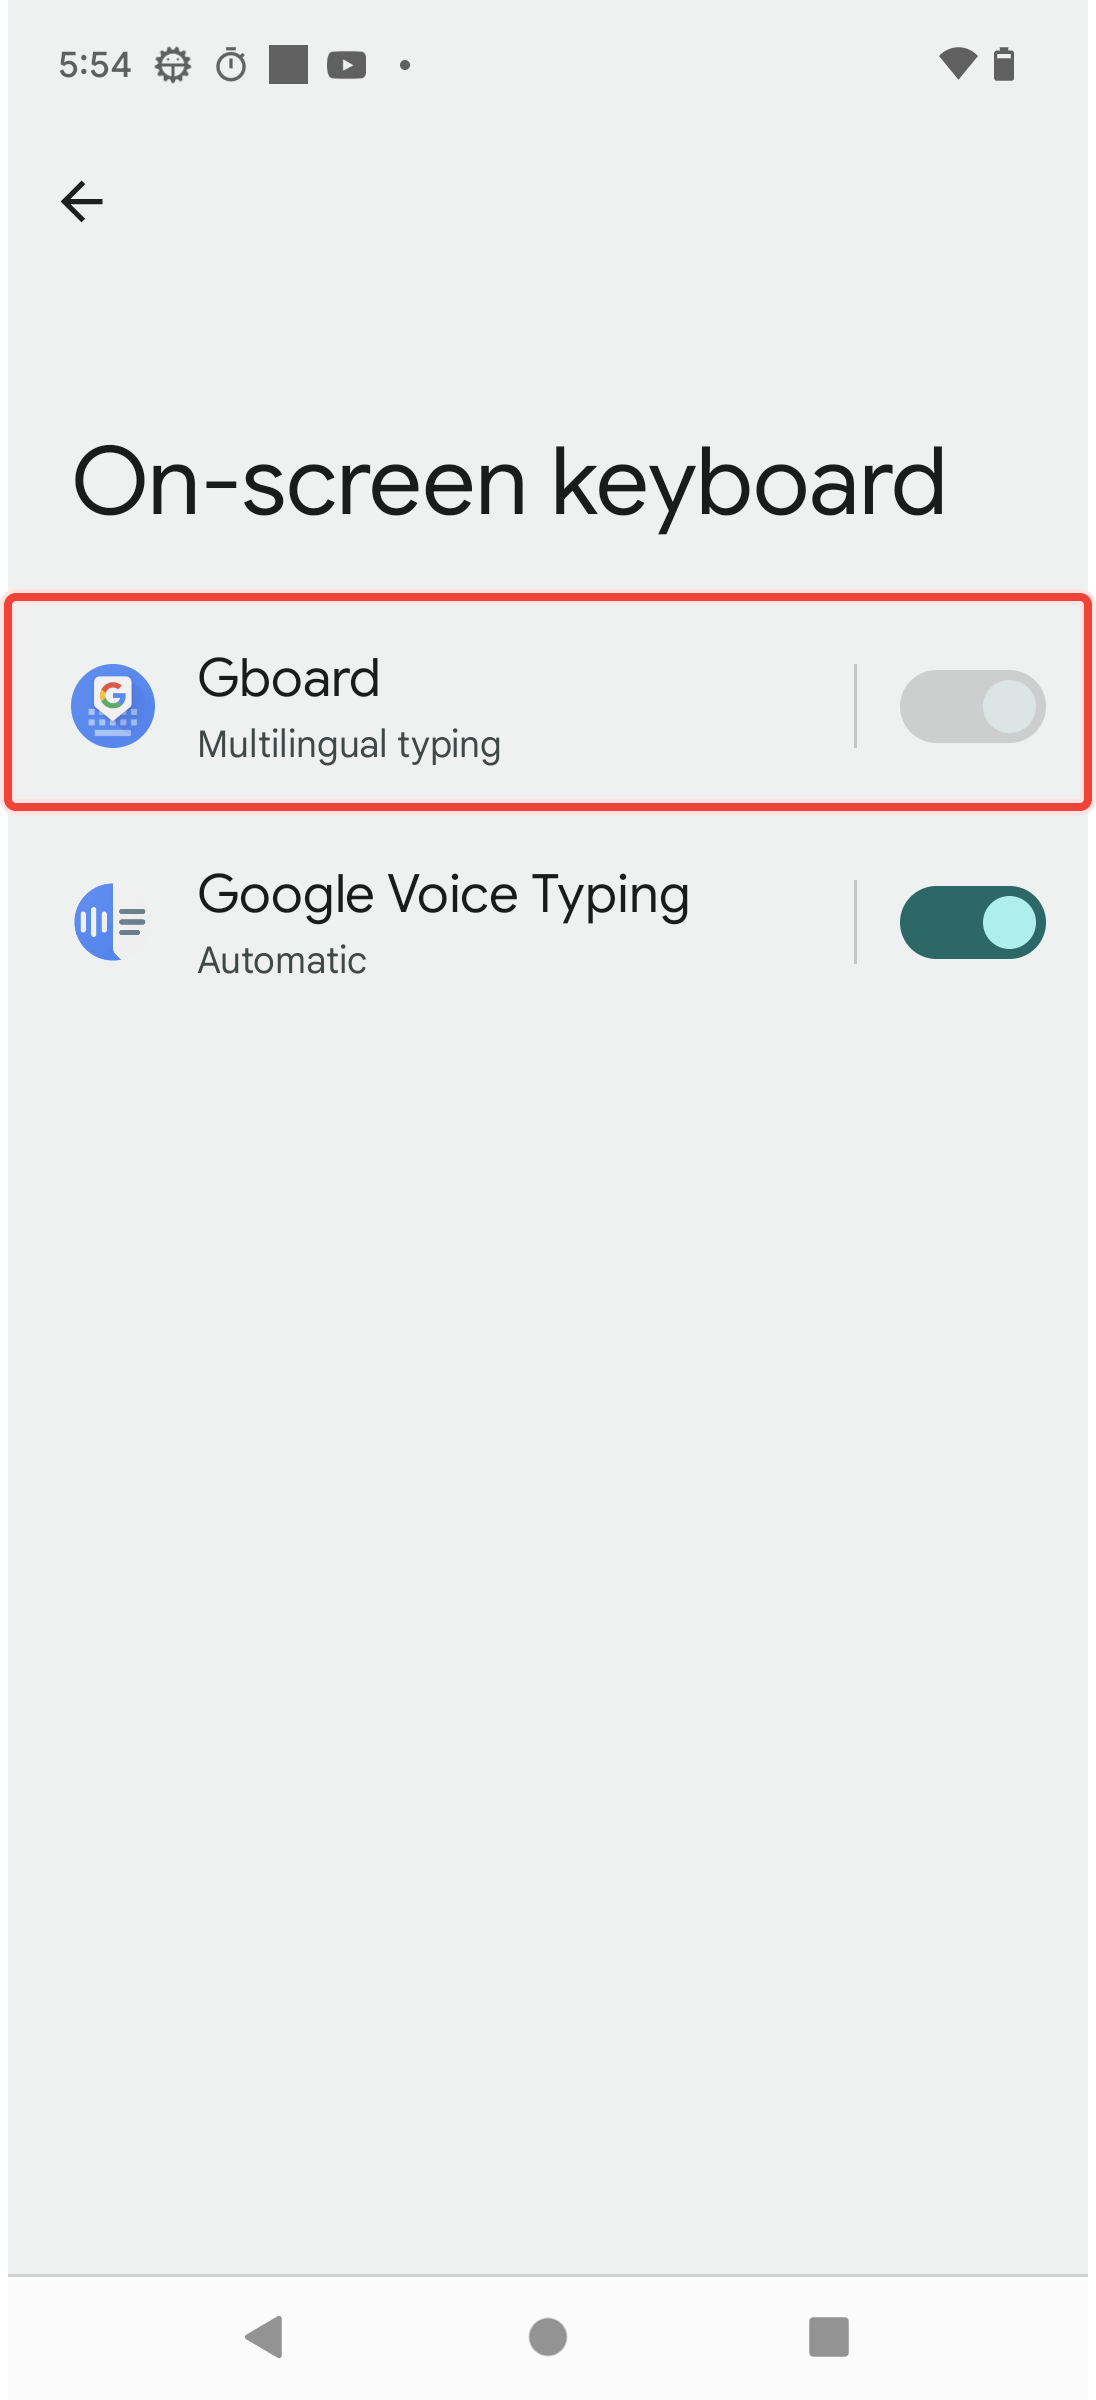 Taping Gboard to enable/diable it according to use case